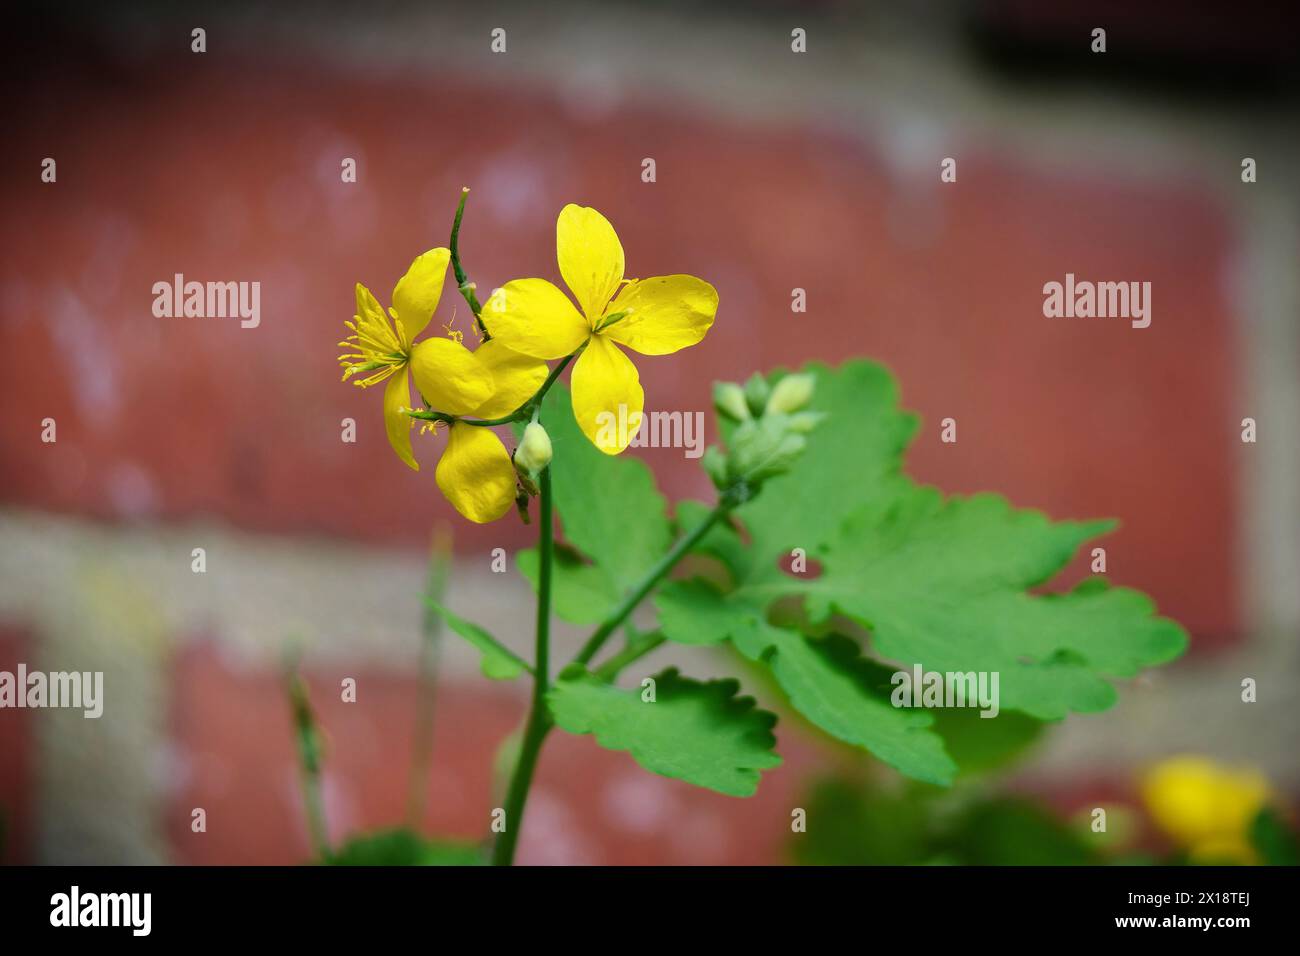 Chelidonium majus yellow flowers of celandine in front of a brick wall in the blurred background as early as mid april in cologne Stock Photo